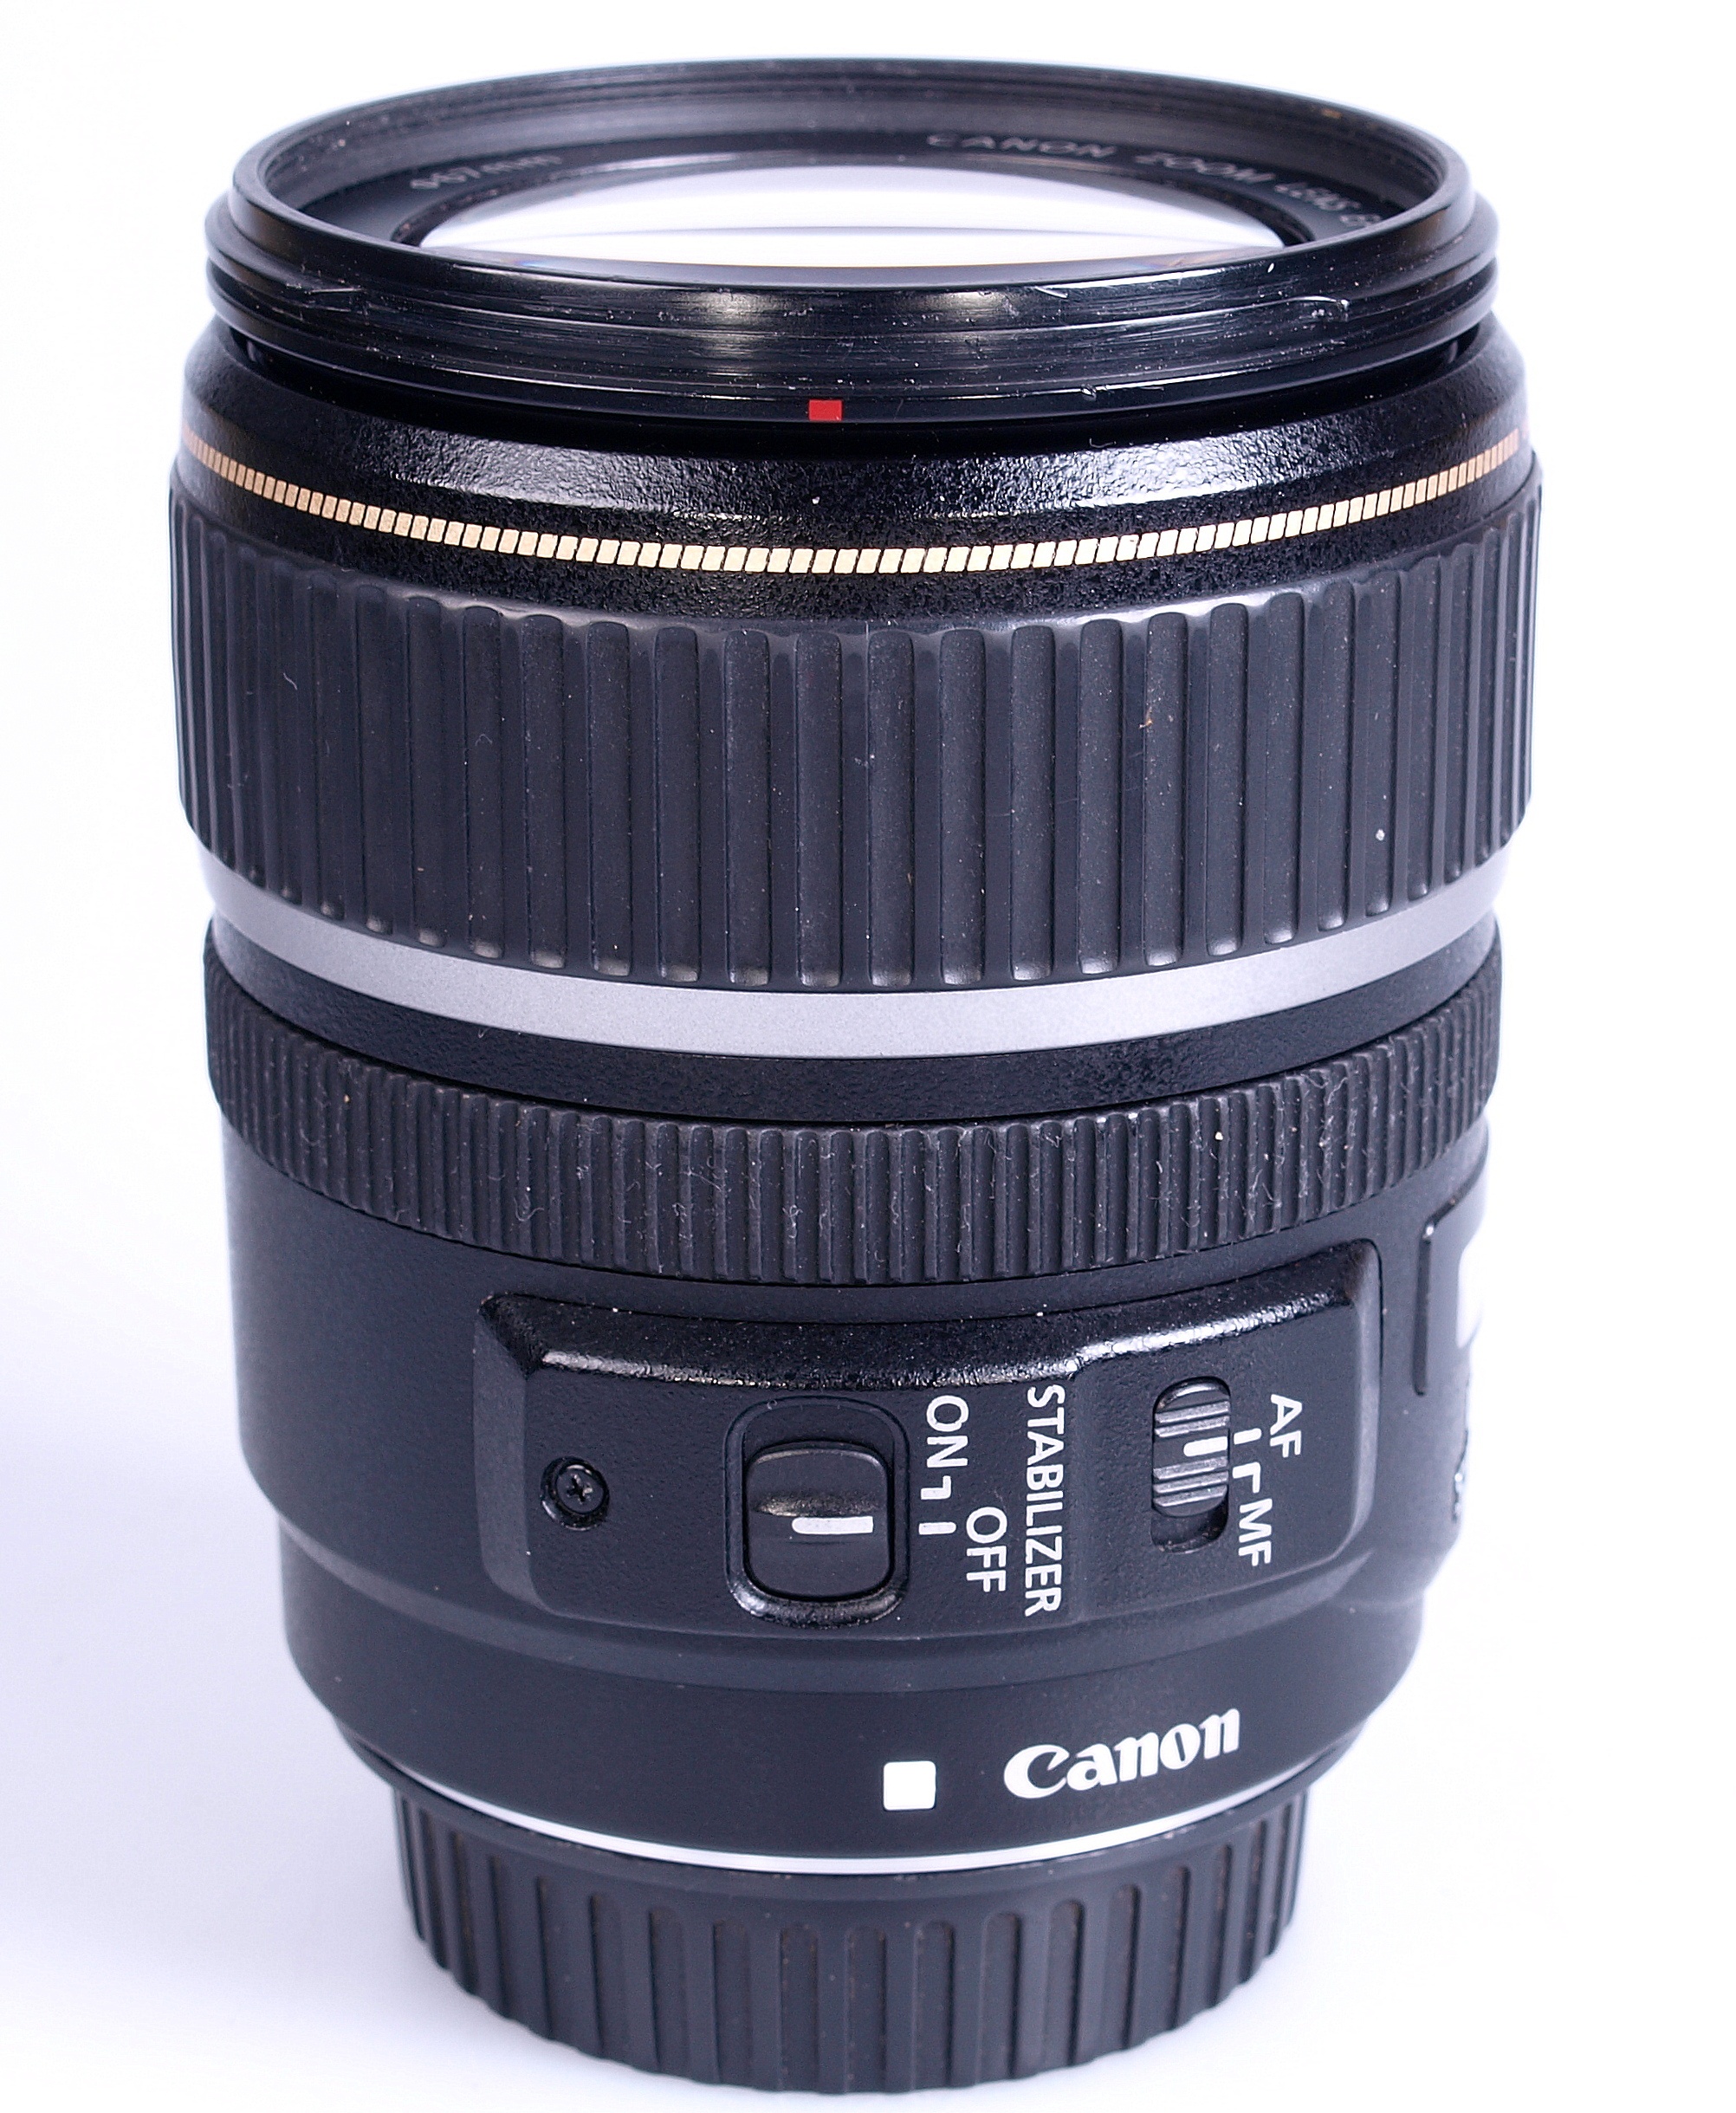 Canon EFS 17-85mm F 4-5.6 IS USM zoom lens.in fine condition - Wide Angle